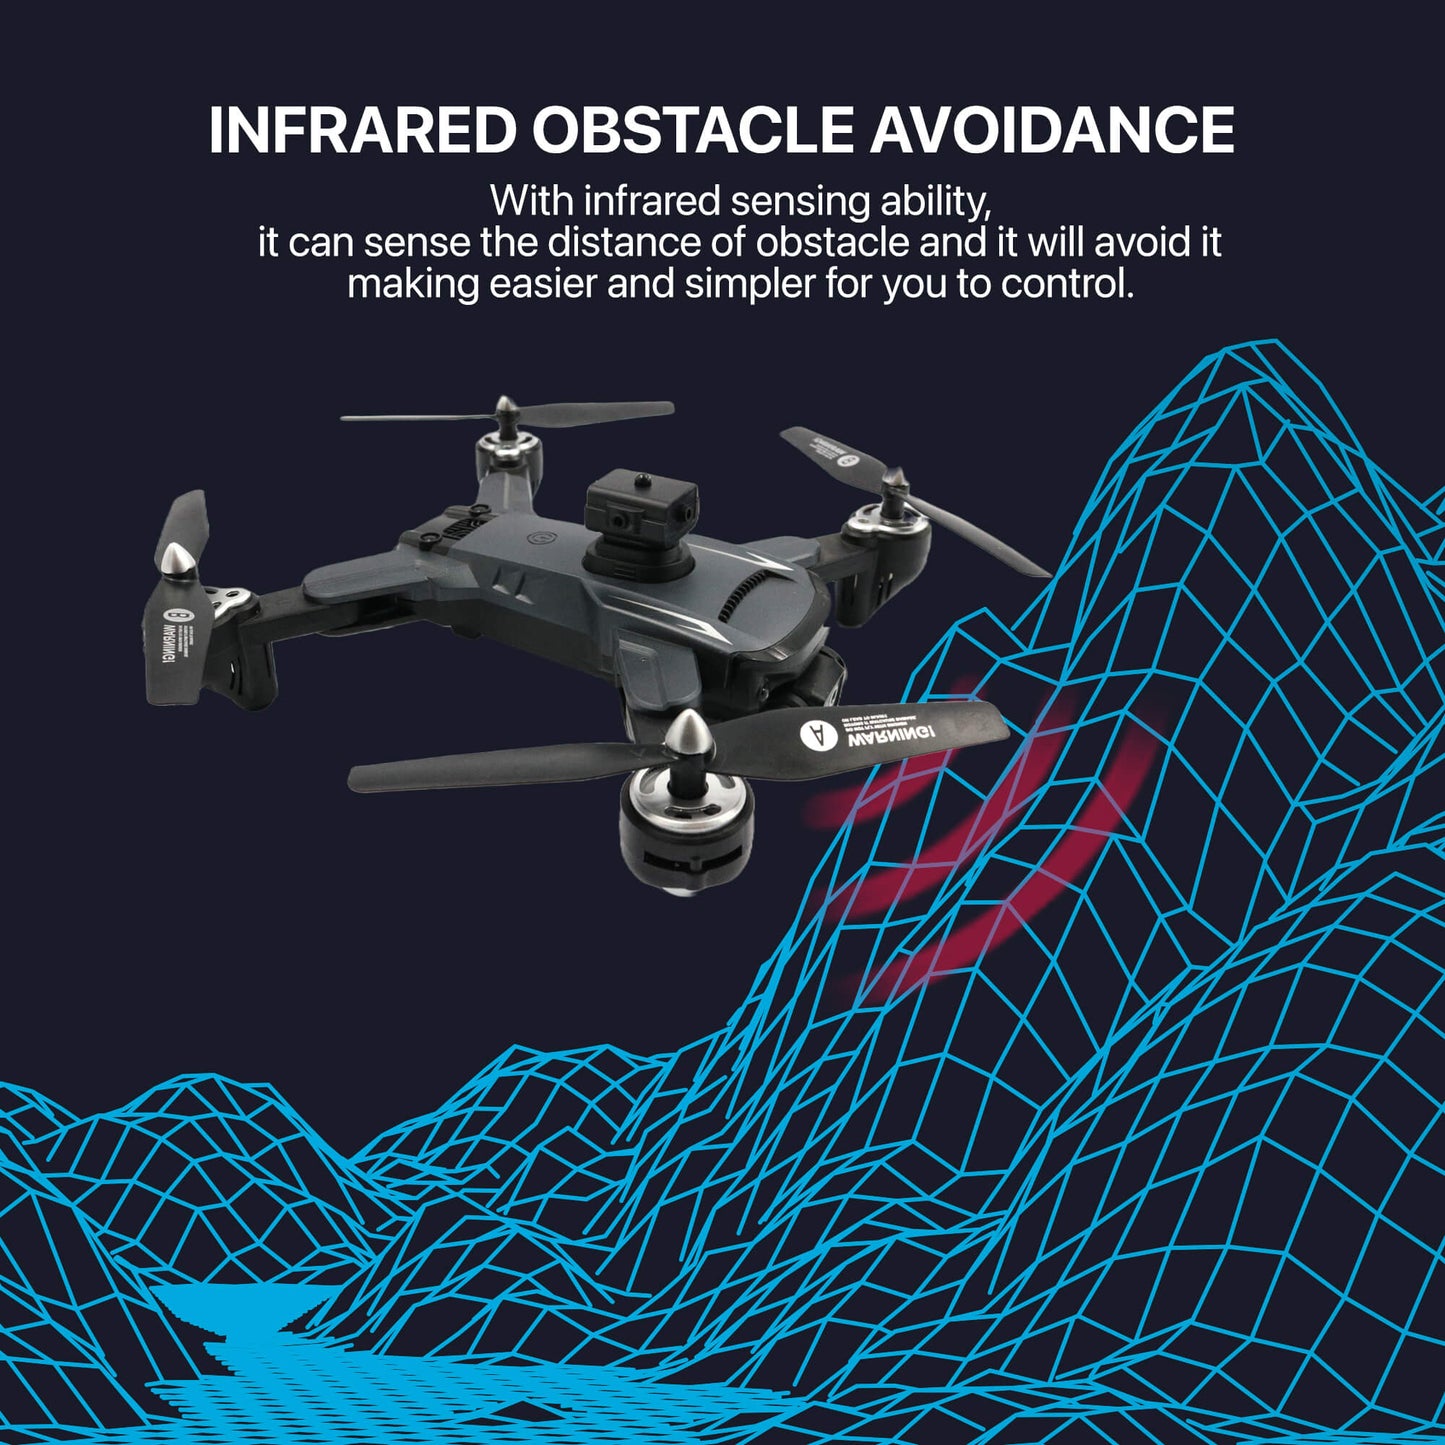 The Bigly Brothers Mark V Extremis BLACK 4k Drone with Camera, 360 Degrees of Obstacle Avoidance, Brushless Motors, 2 Batteries Included, Below 249 Grams, with Carrying Case, NO ASSEMBLY REQUIRED Ready to Fly!